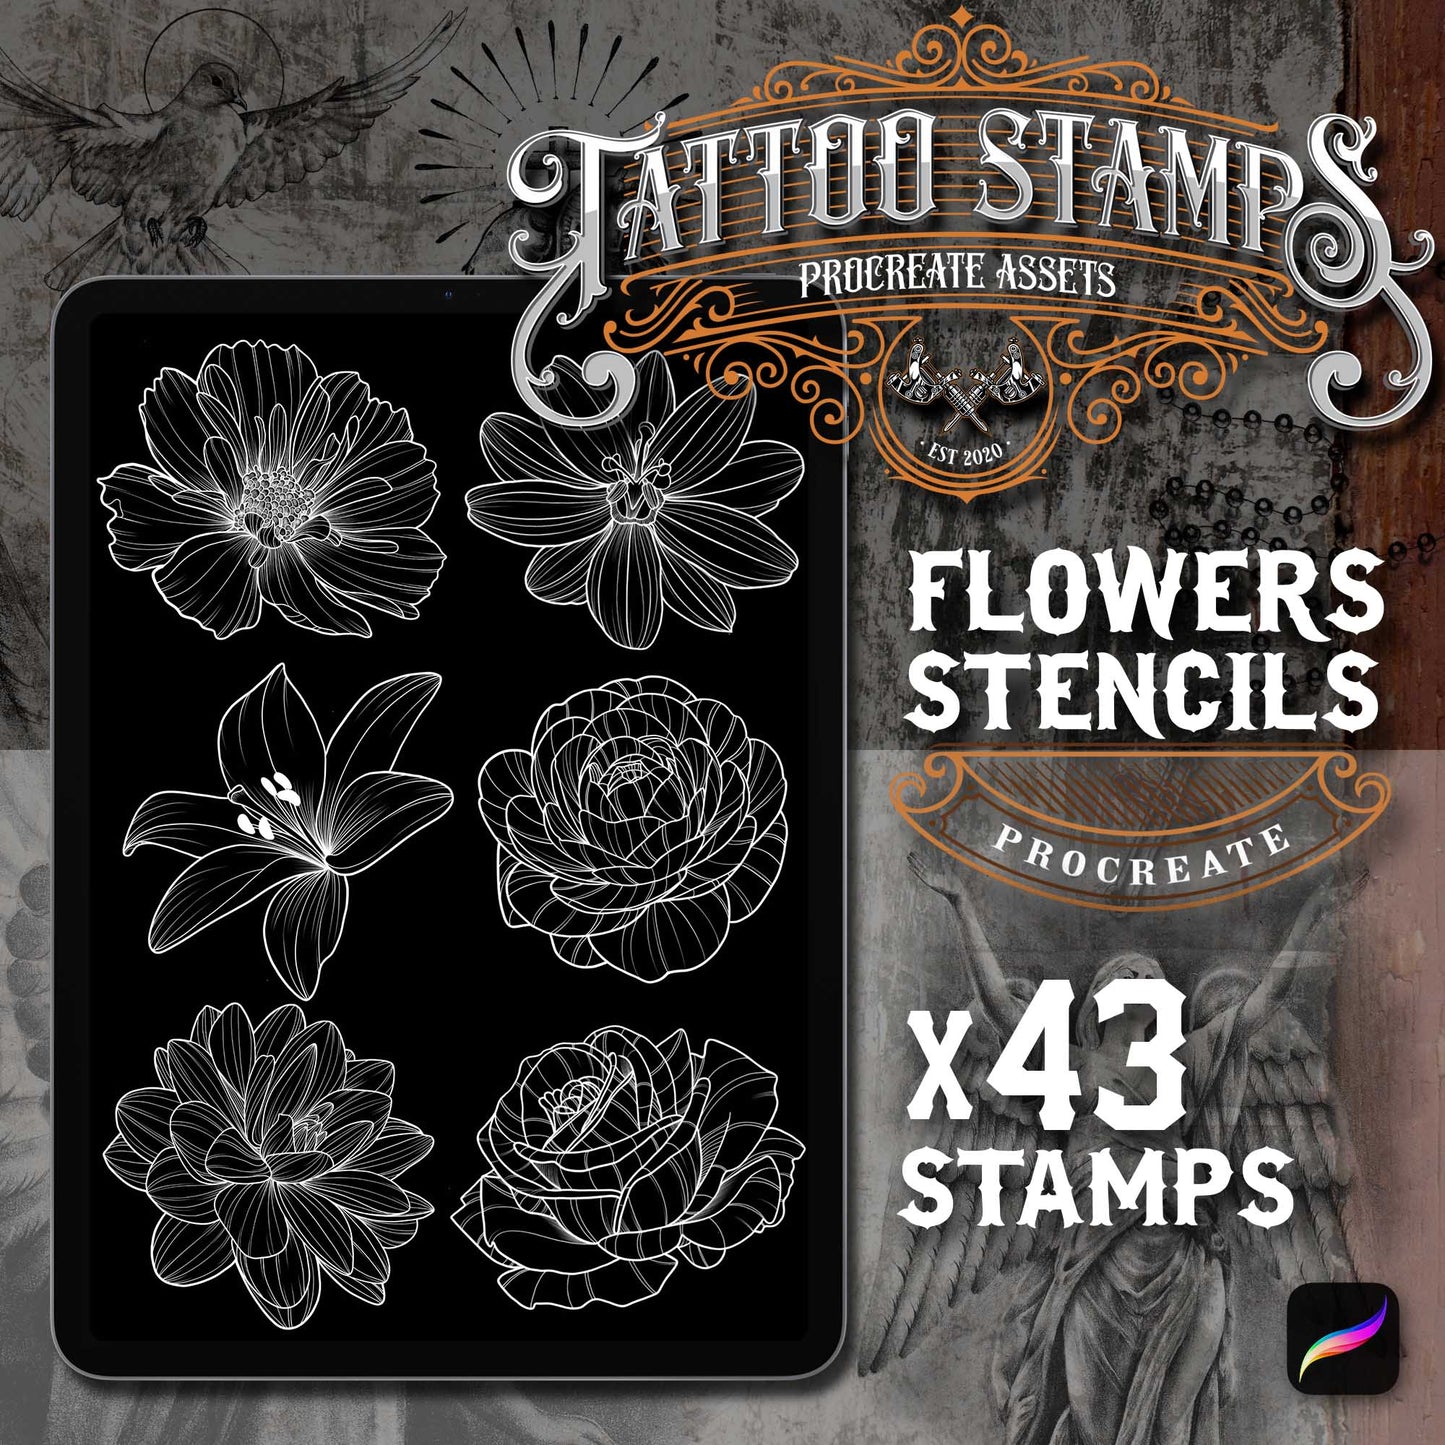 43 Flowers Stencil Tattoo Procreate app for iPad & iPad pro  in the Master Pack by TattooStampsArt